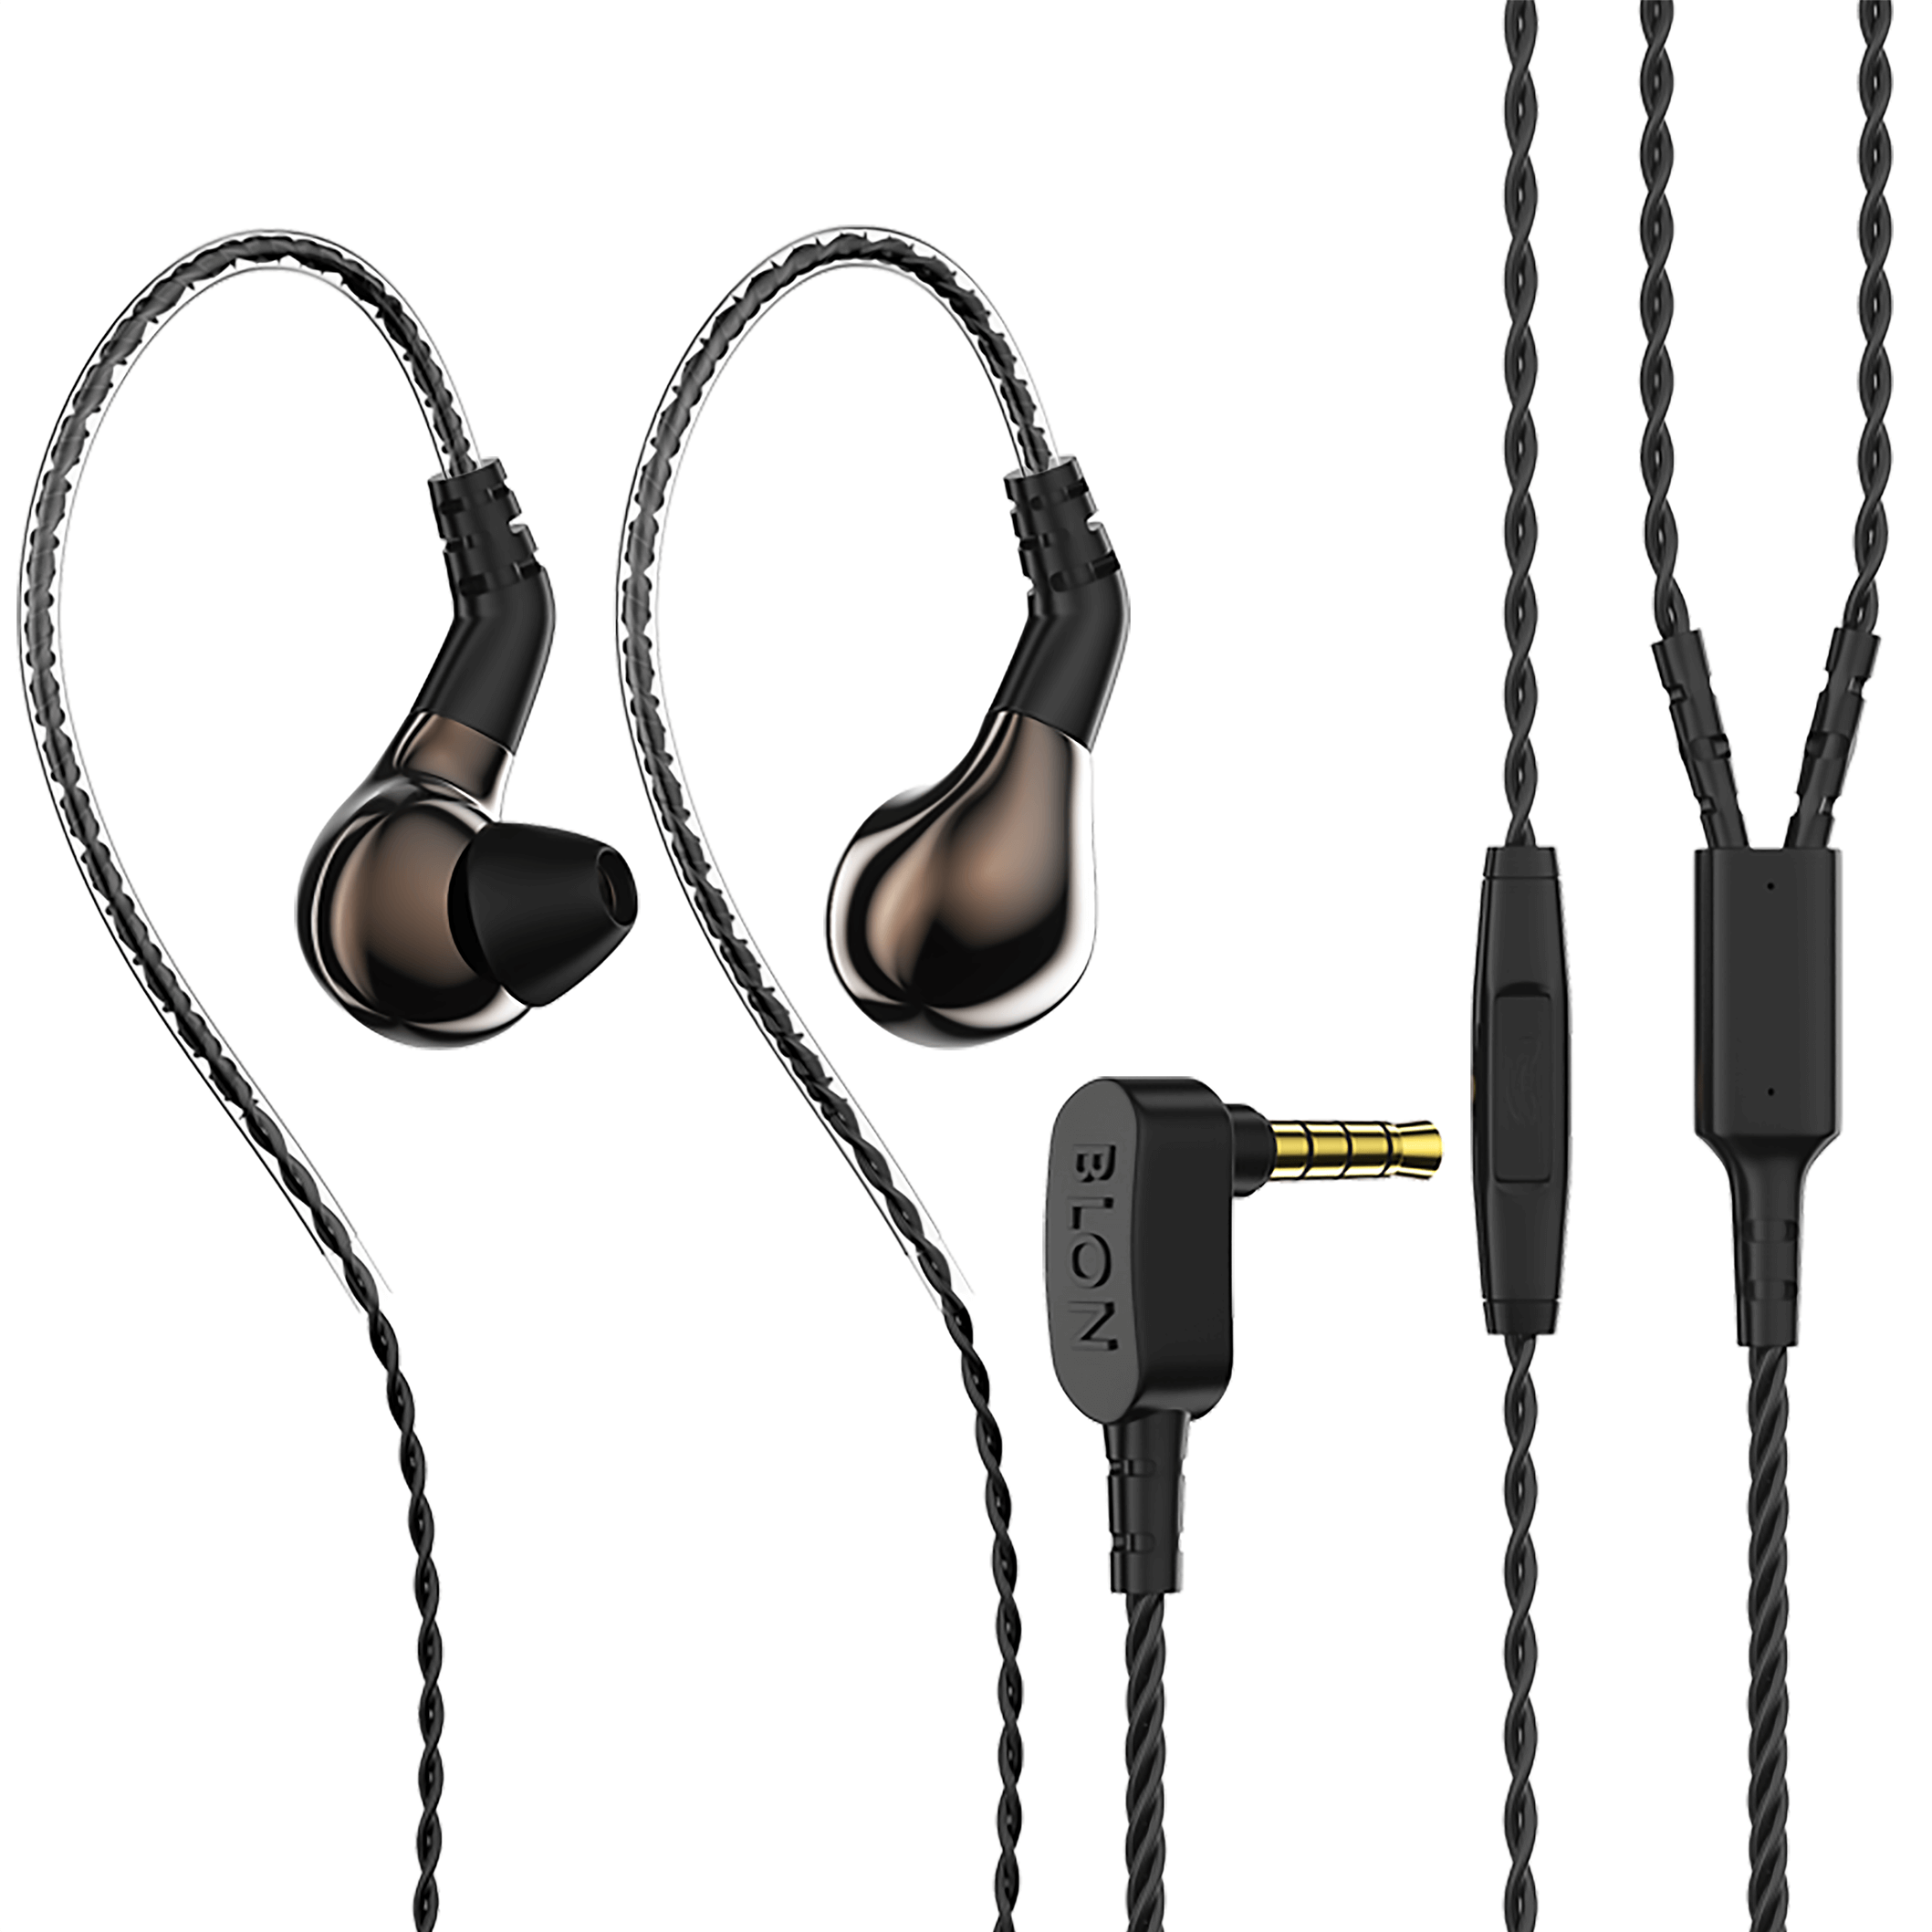 Buy Blon BL-03 Earphone at HiFiNage in India with warranty.